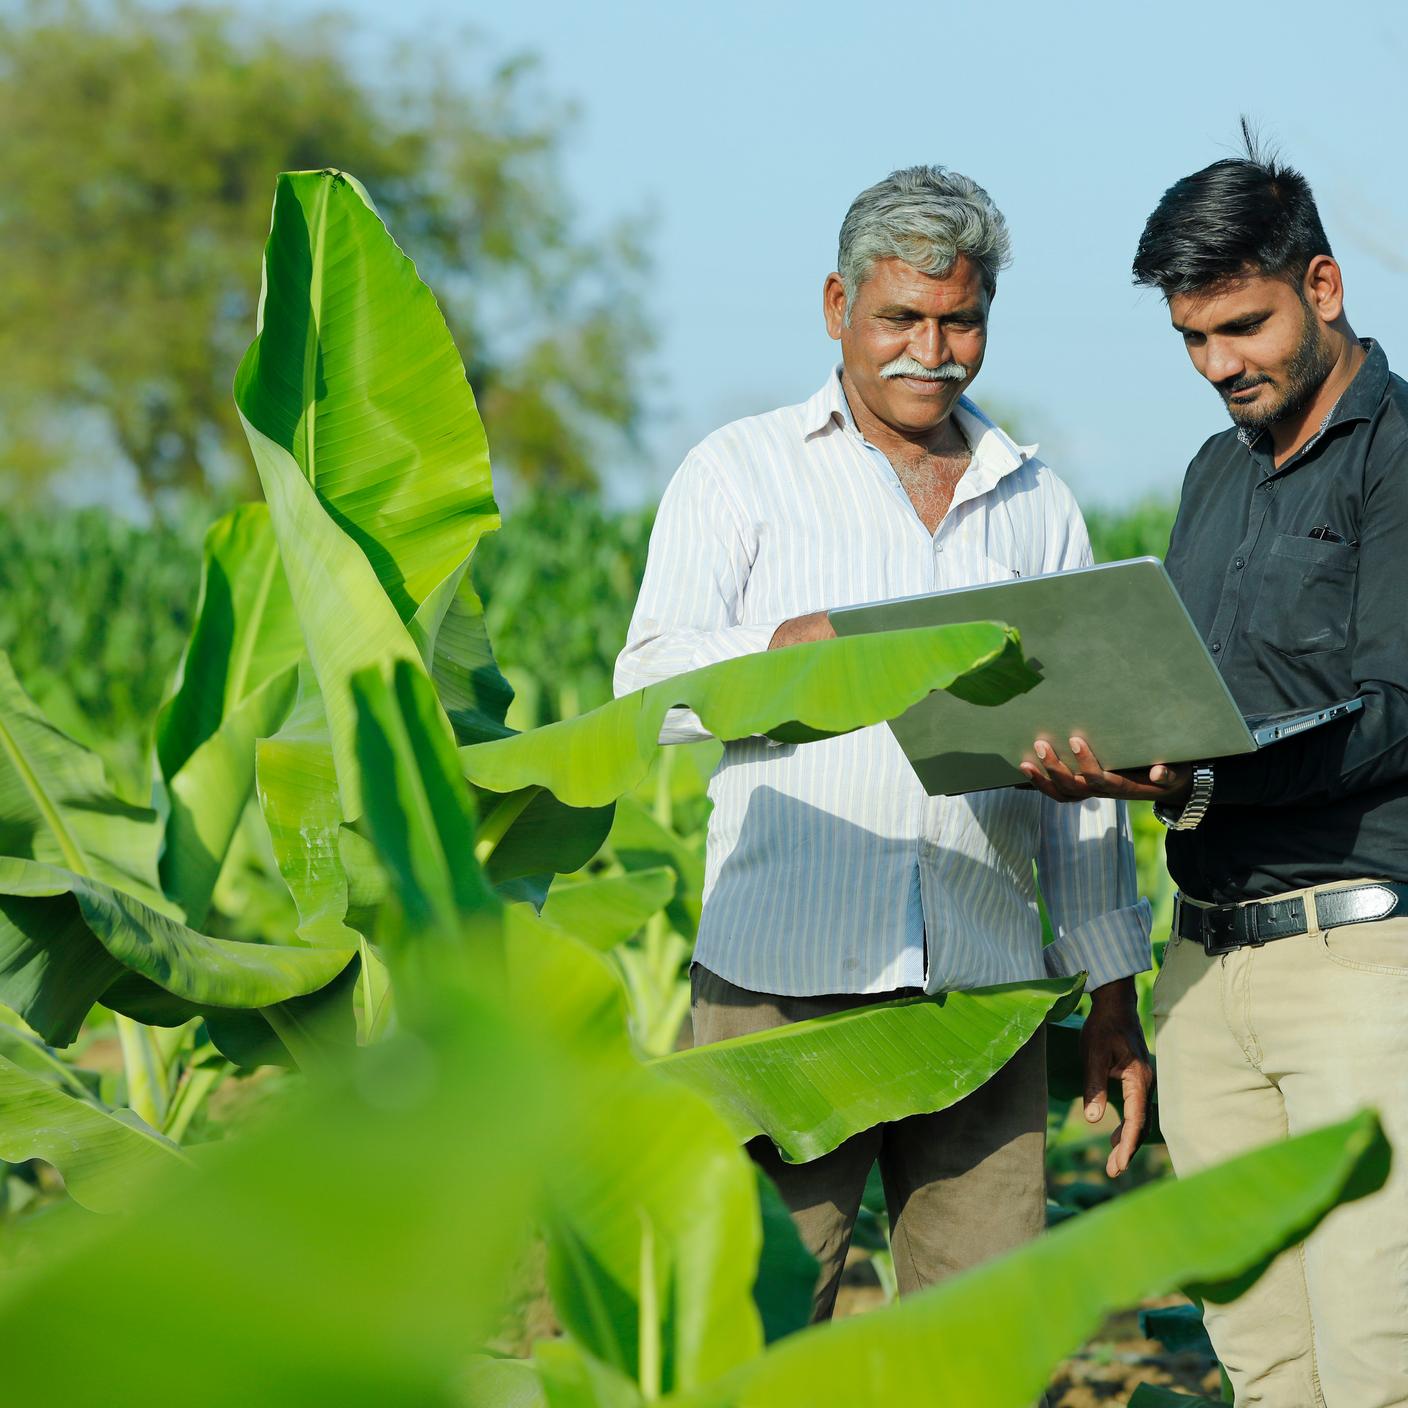 Farmer with agronomist in field looking at model on laptop